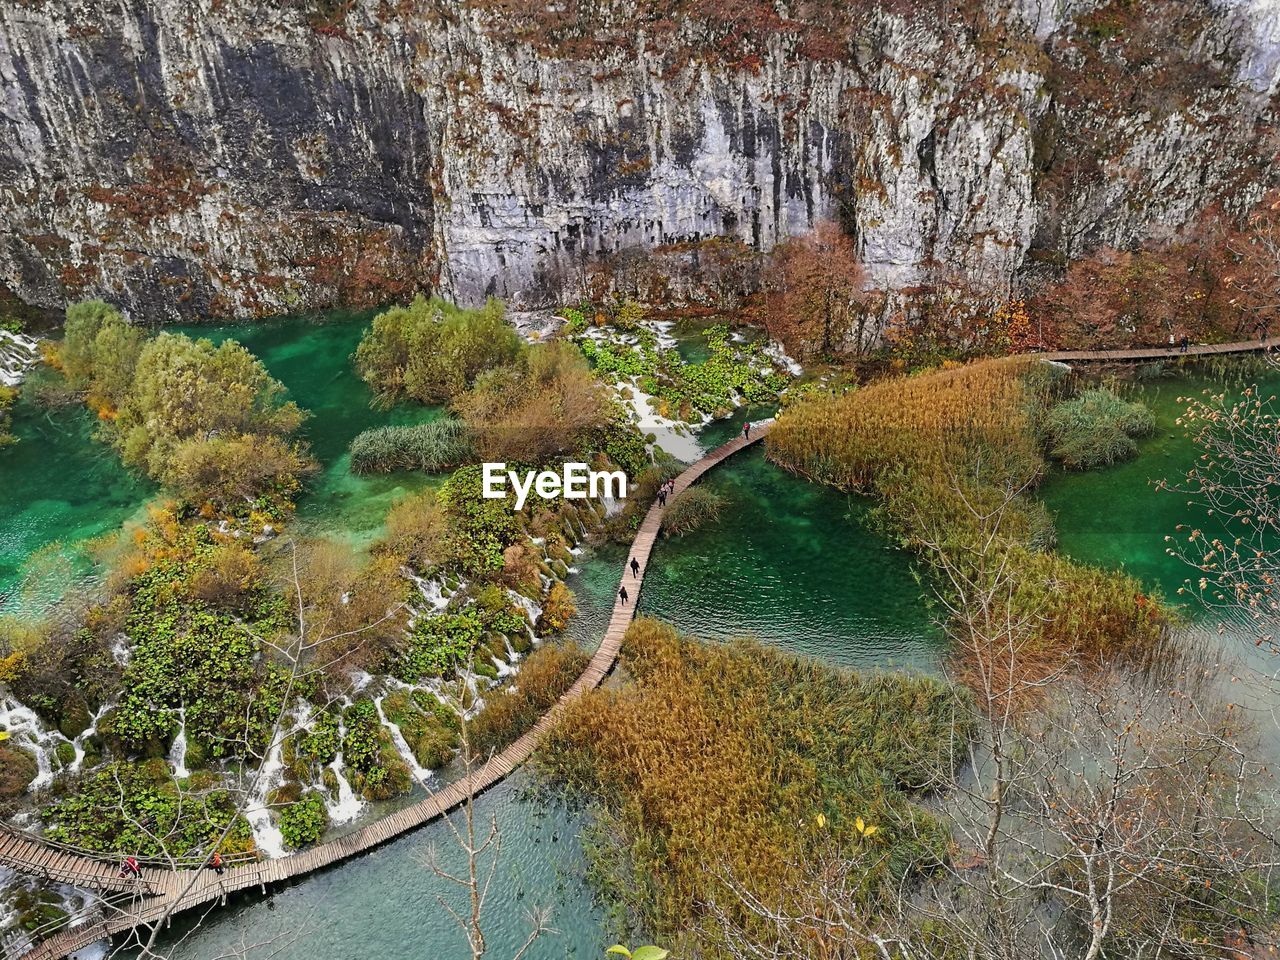 High angle view of plitvice lakes national park